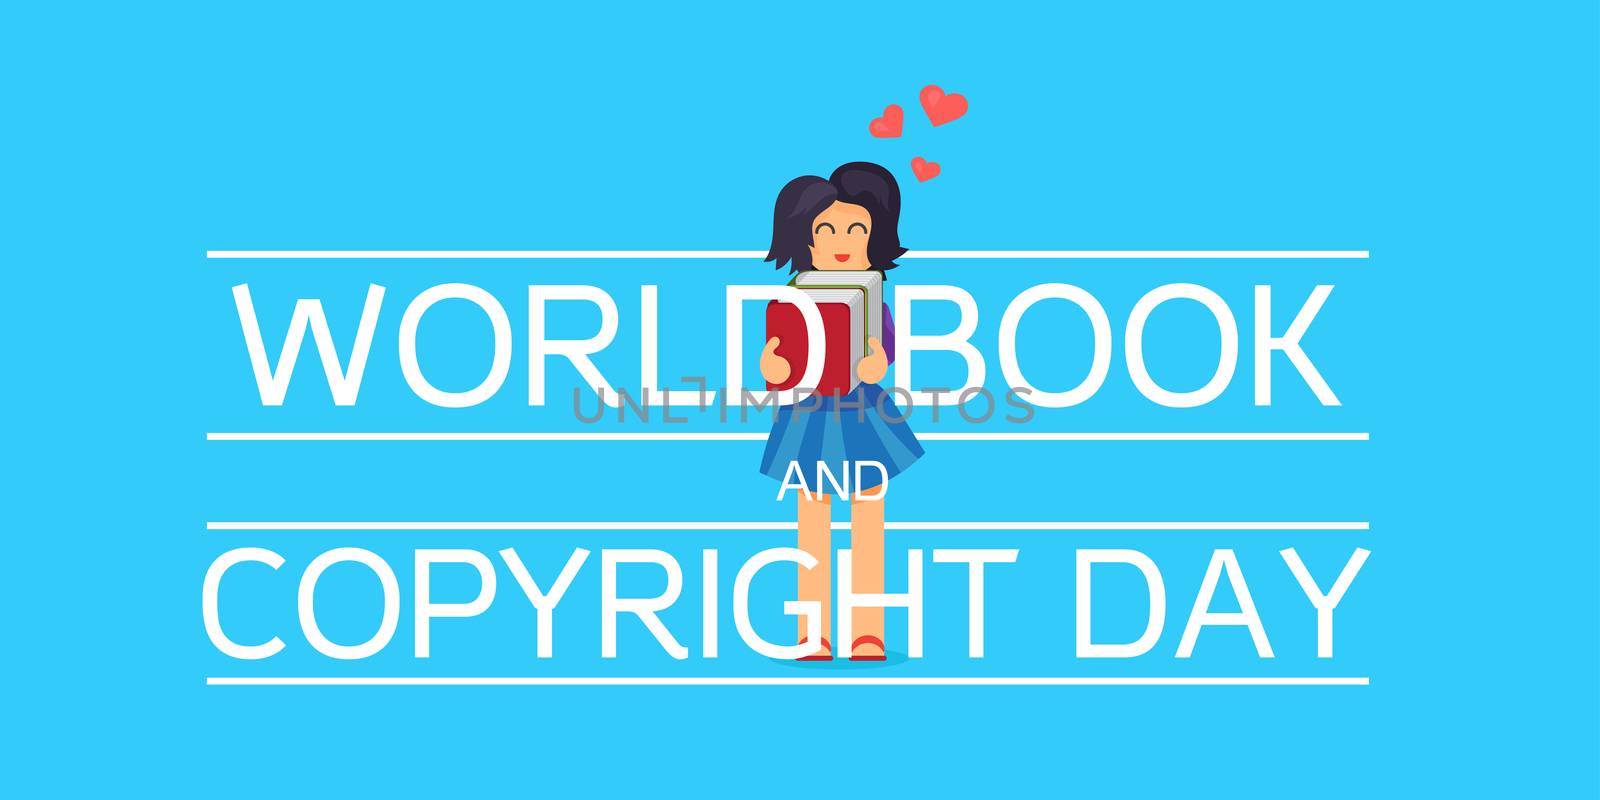 World Book and Copyright Day by barsrsind